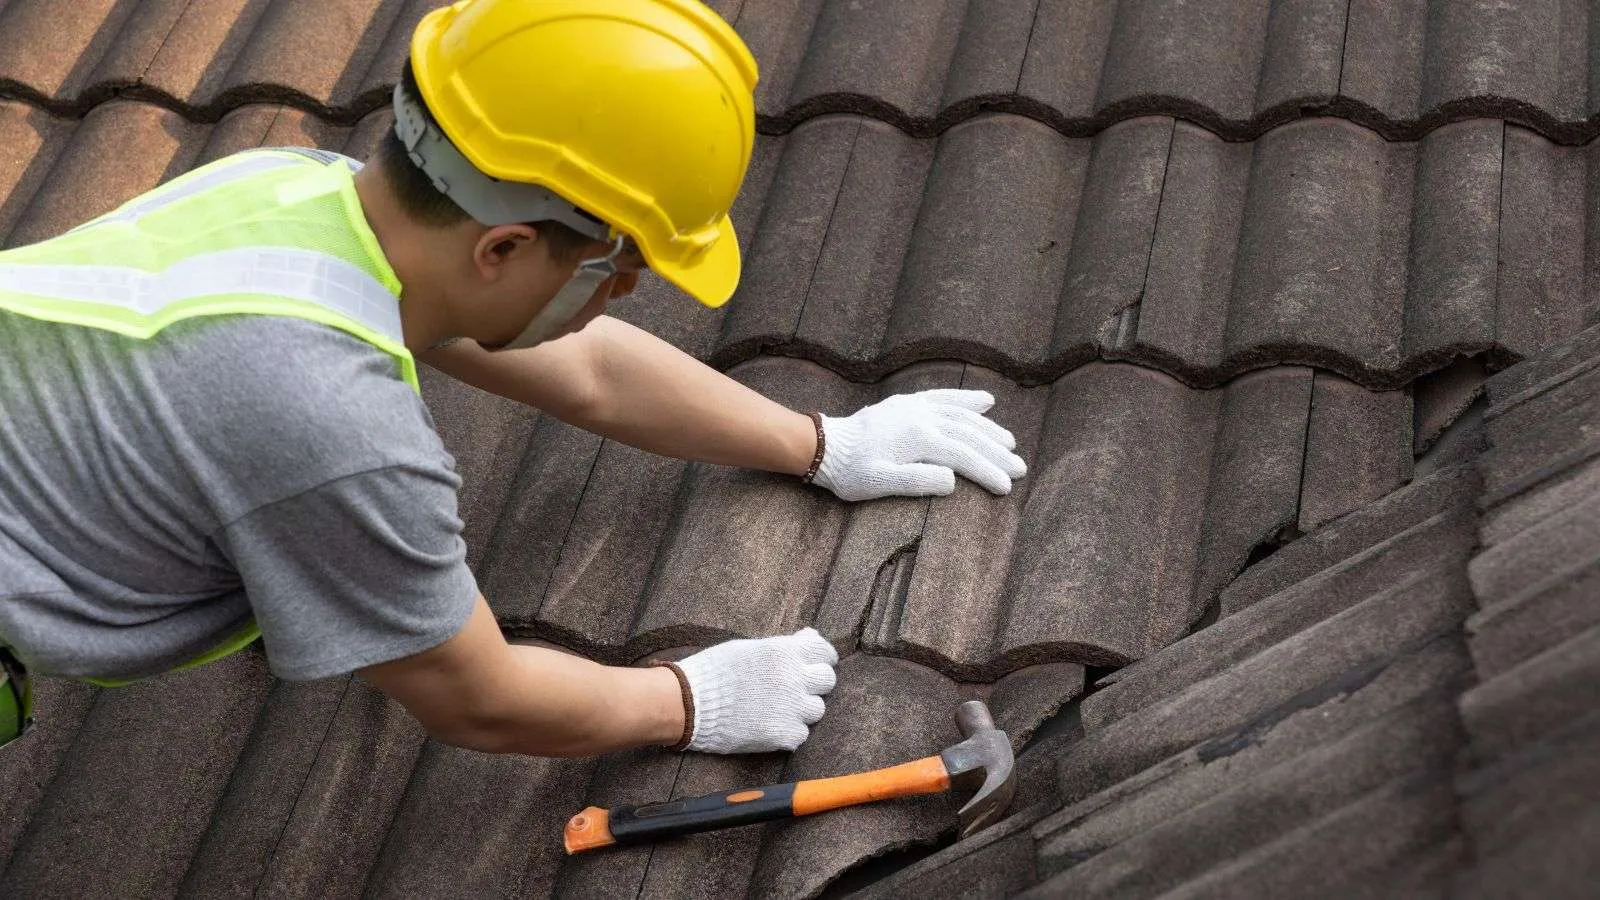 acid affects concrete roofs - bighomeprojects.com